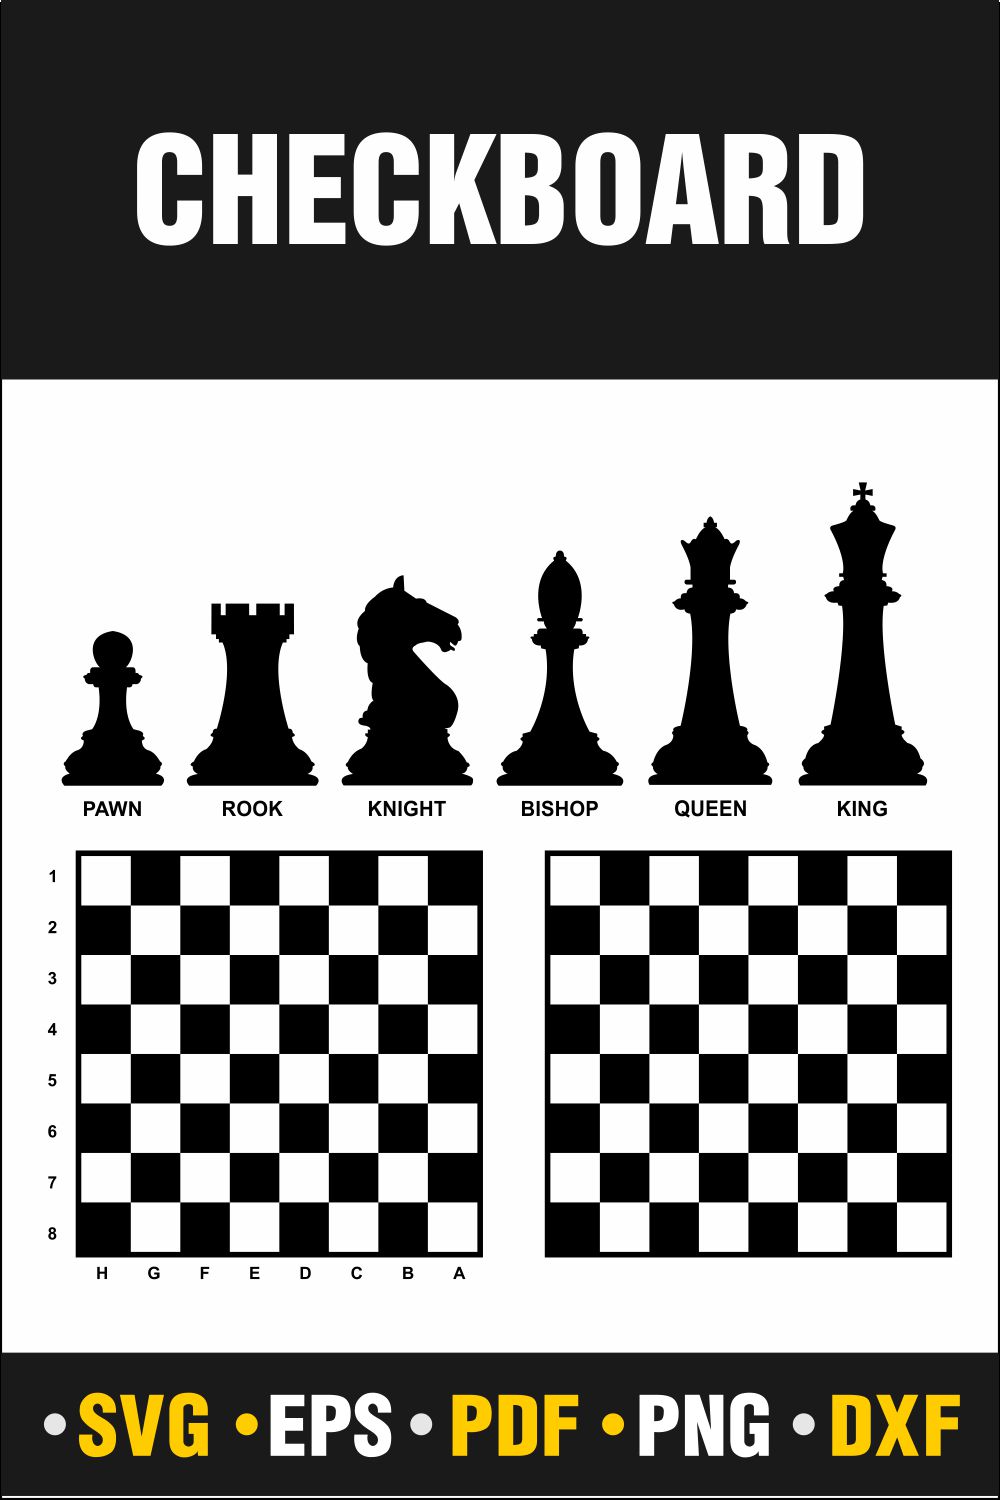 Check Board Svg, Check Board, Chess Svg, Chess Png, Chess Svg, Horse Svg, Pawn Svg, Rock Svg, Knight Svg, Bishop Svg, Queen Svg, King Svg Instant Download Vector Cut file Cricut, Silhouette, Pdf Png, Dxf, Decal pinterest preview image.